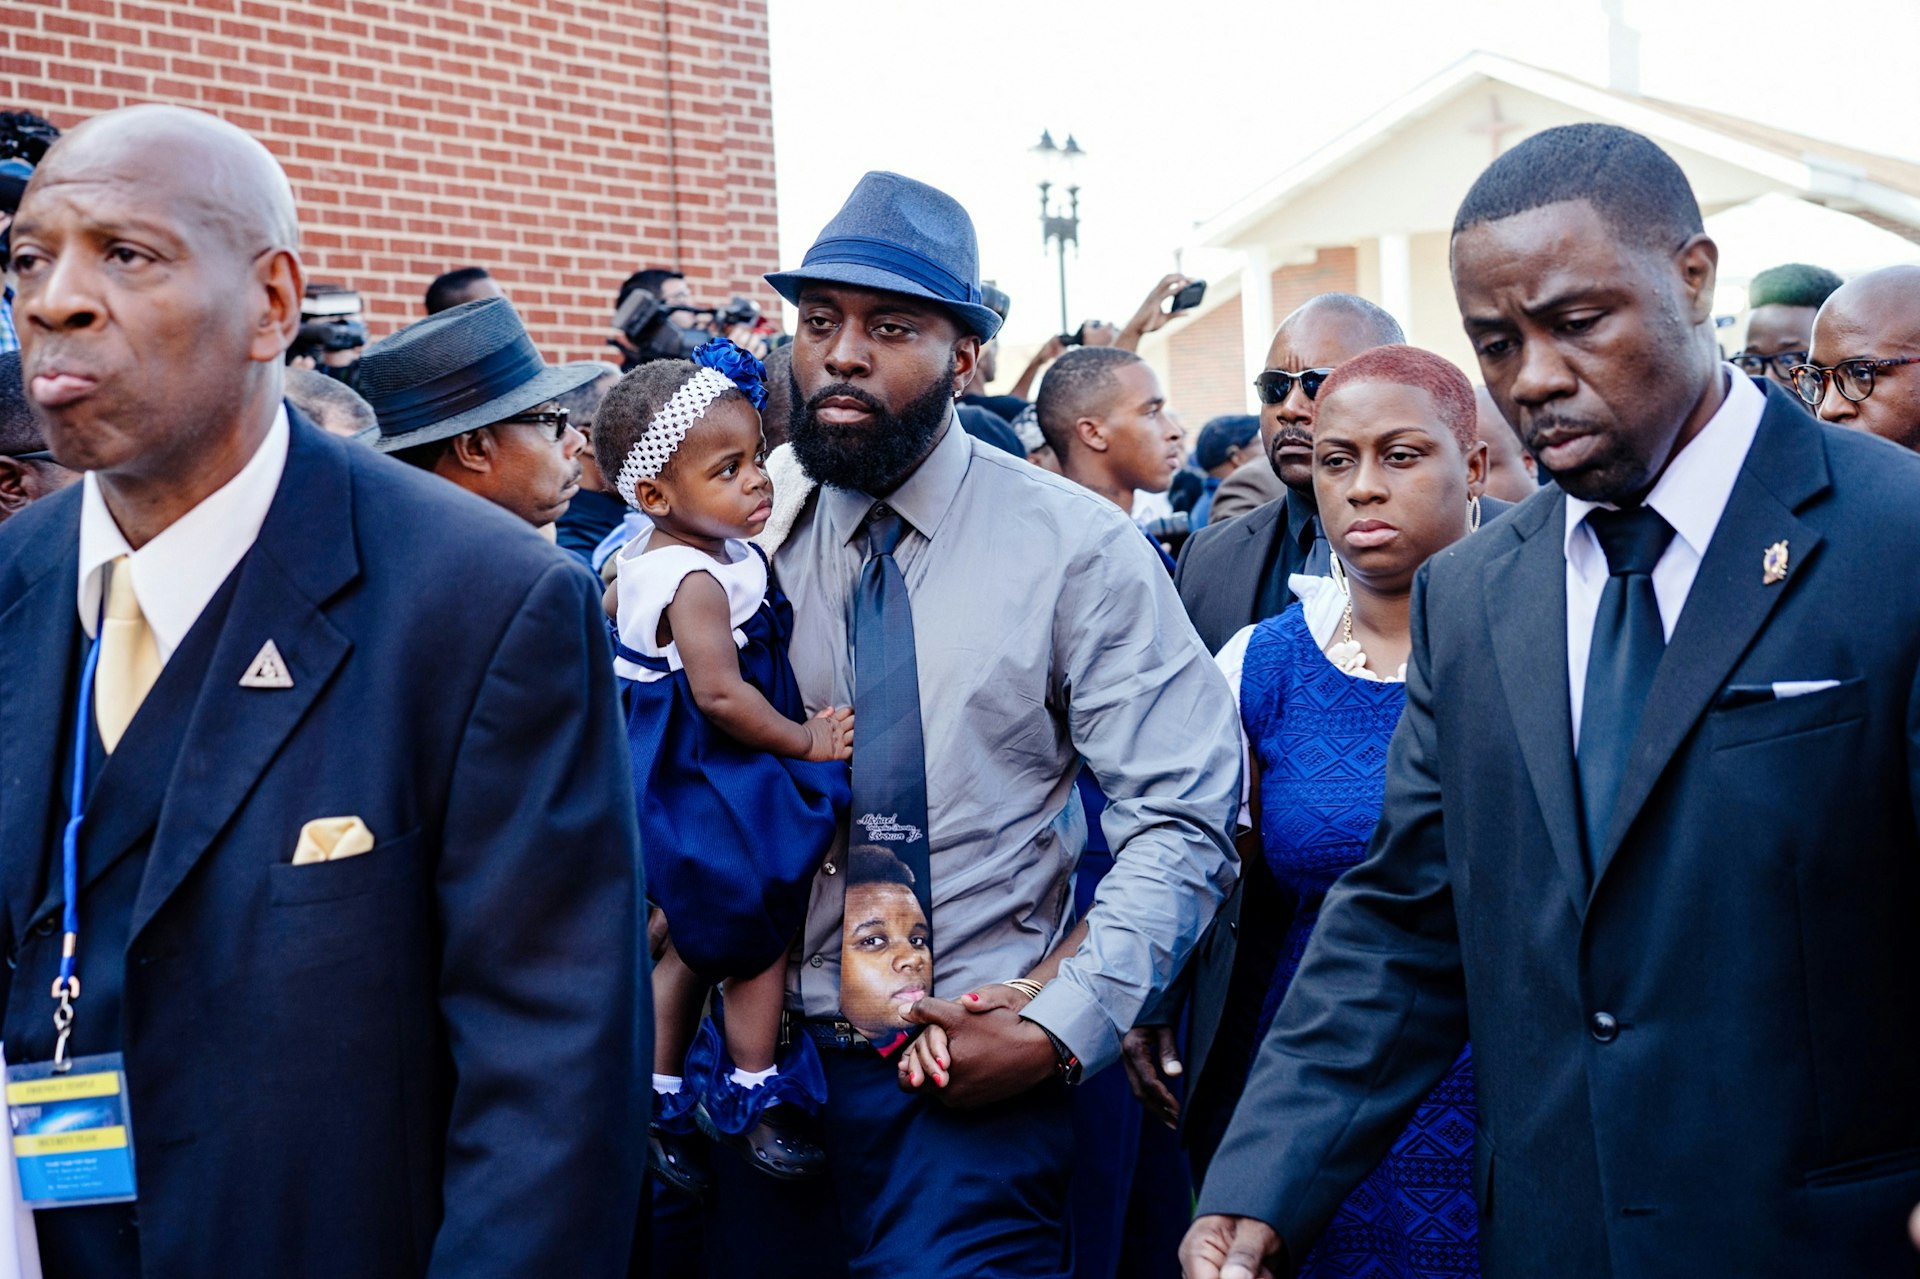 Michael Brown Sr. walks into the Friendly Temple Missionary Baptist Church, St. Louis, Missouri, to attend the funeral service of his son, Michael Brown Jr.